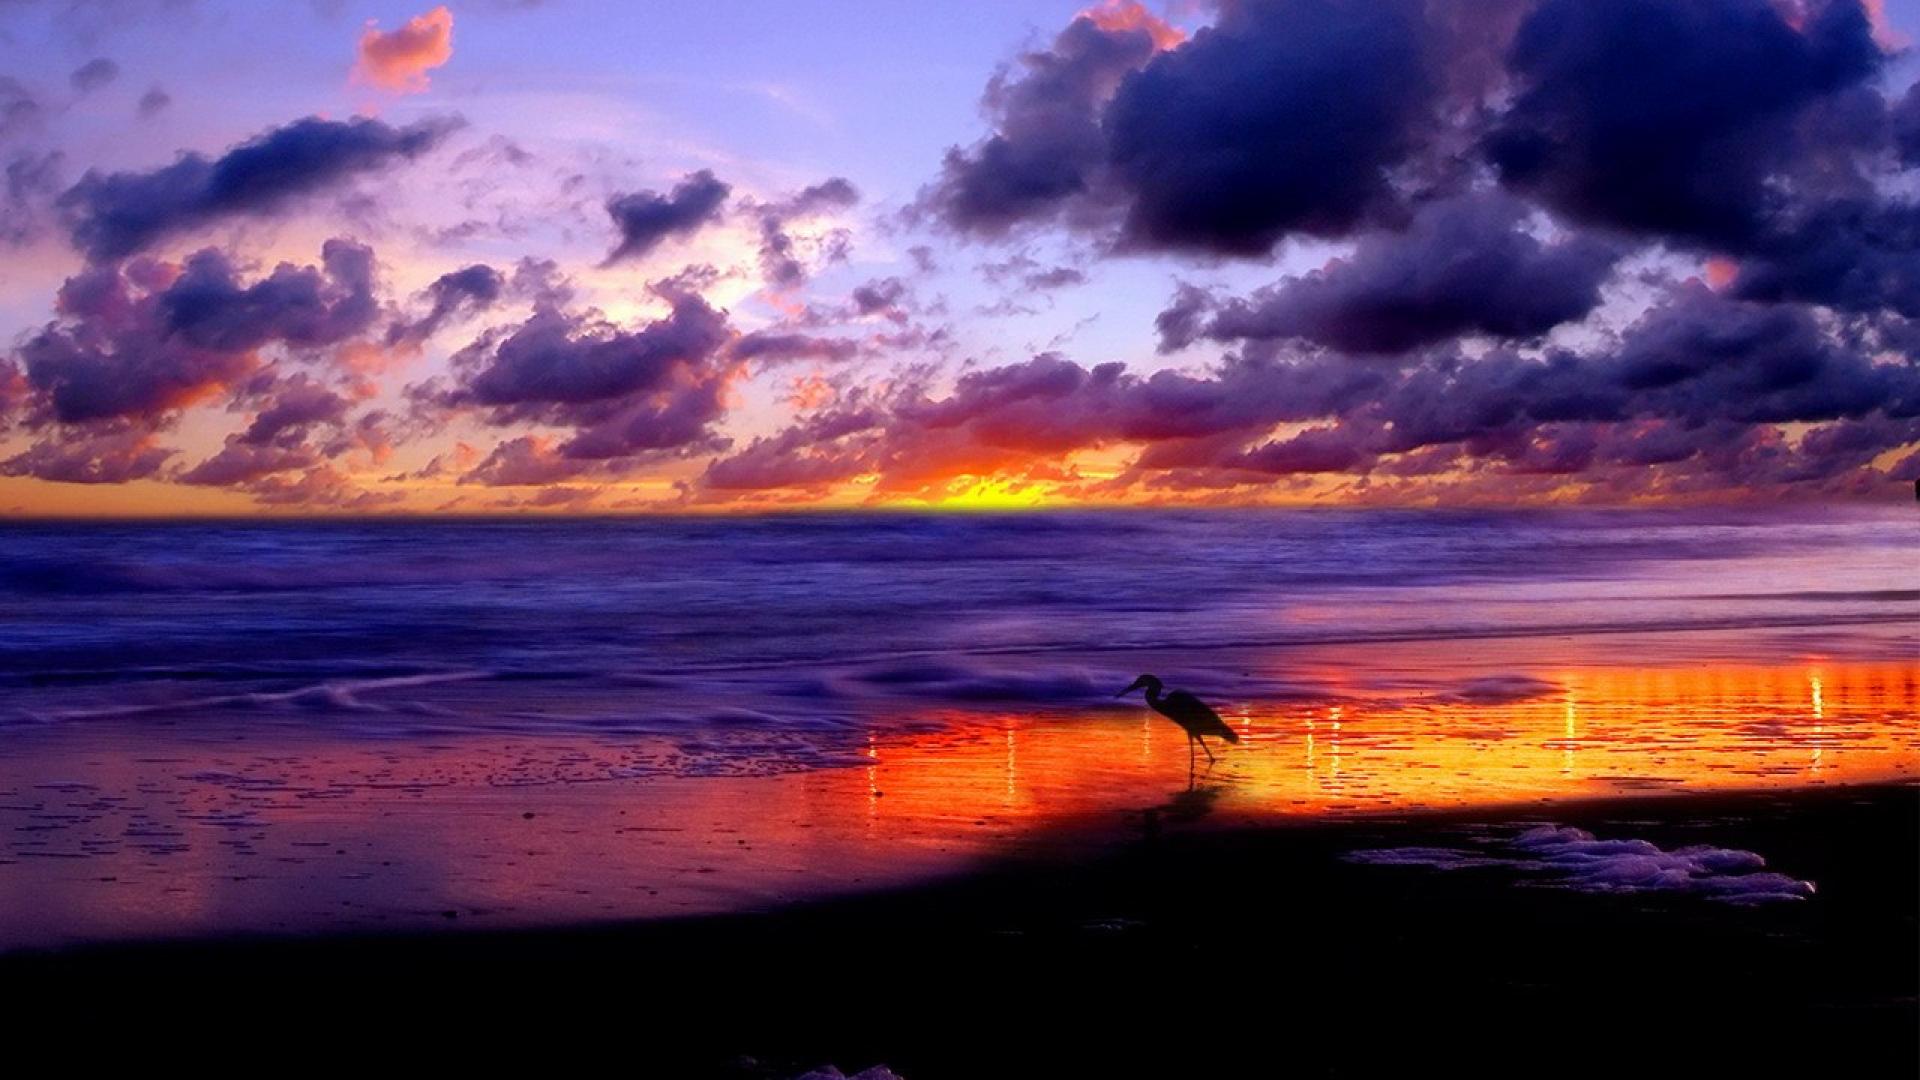 Nature photography wallpaper silhouette sunset in hawaii nature